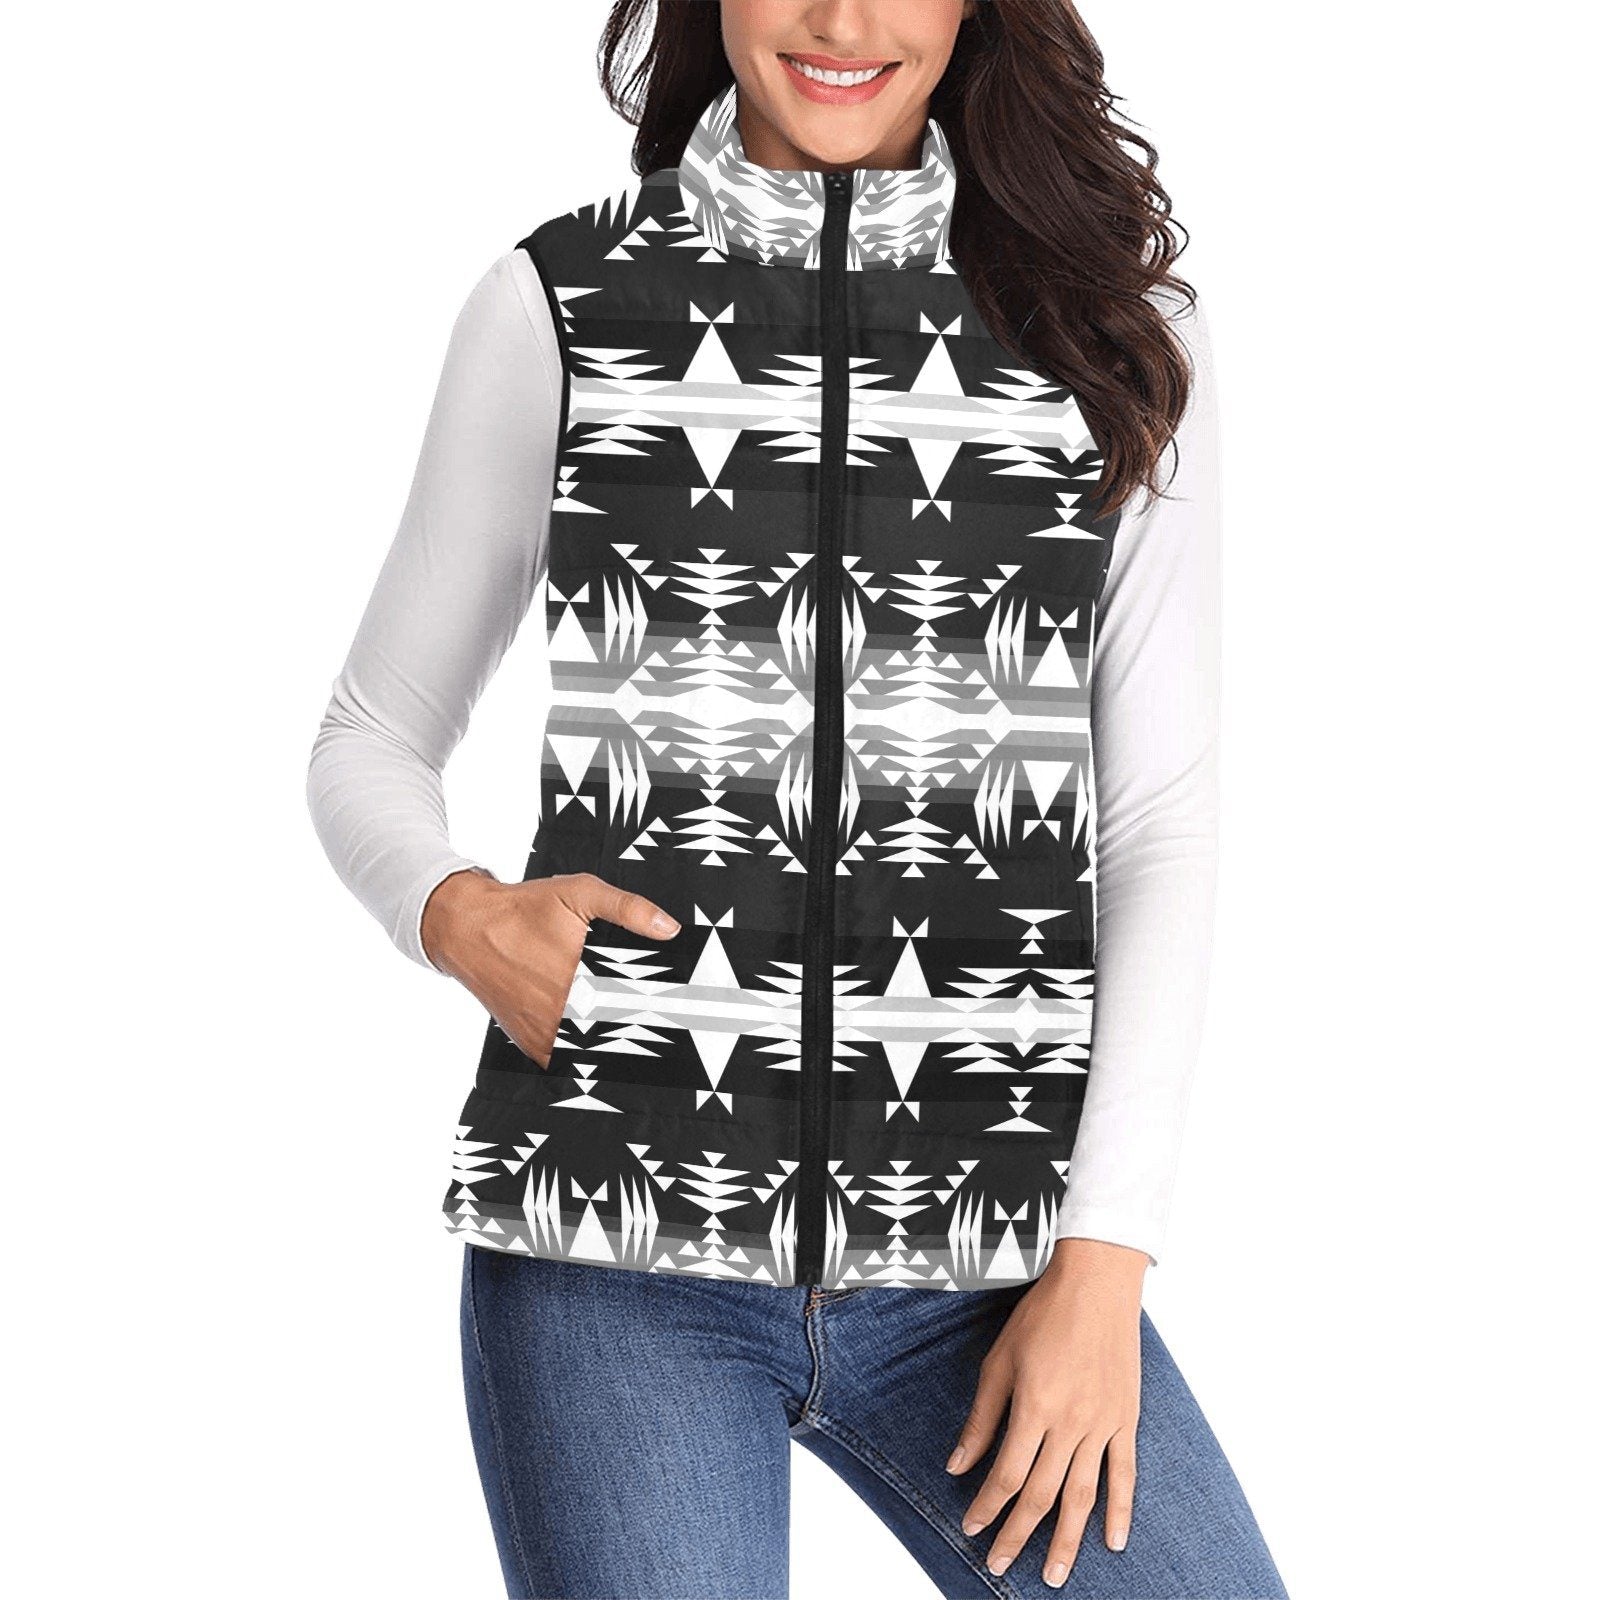 Between the Mountains Black and White Women's Padded Vest Jacket (Model H44) Women's Padded Vest Jacket (H44) e-joyer 